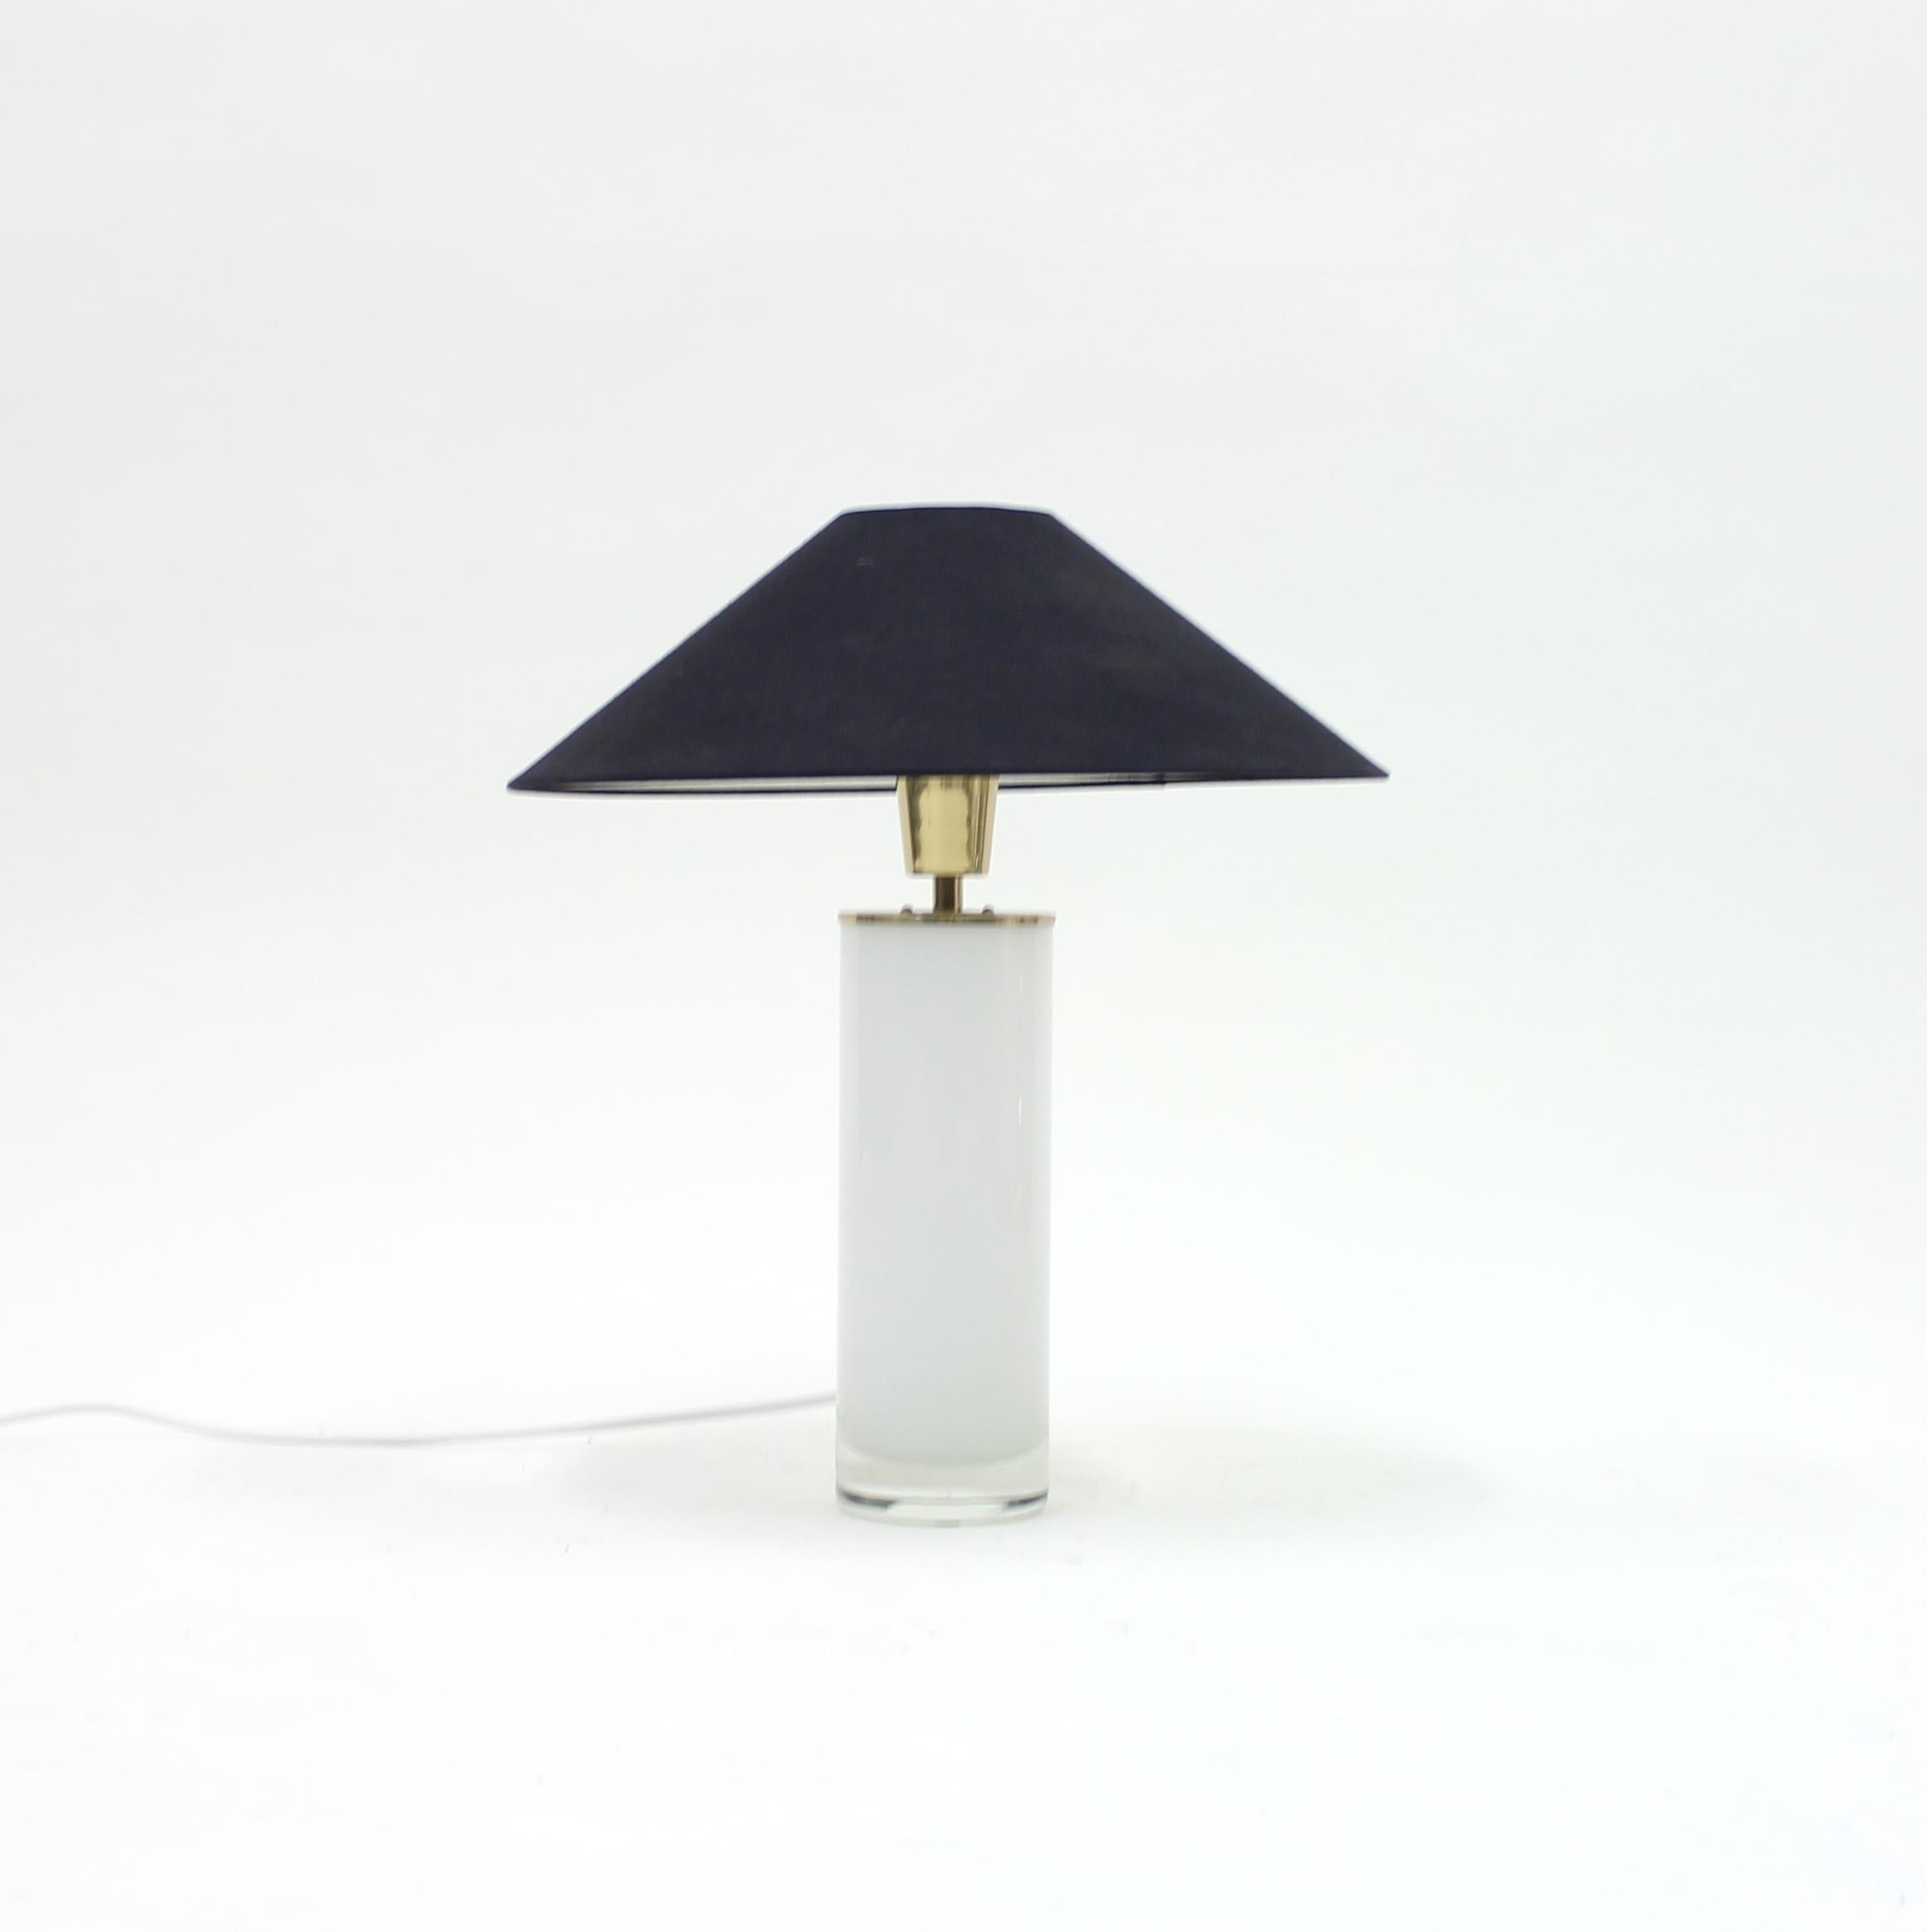 Table lamp with white opaline glass base and brass fittings, later black shade. Most likely Swedish but made by an unknown producer. Marked FAB 62 422. Newly rewired. Very good vintage condition with minor ware.